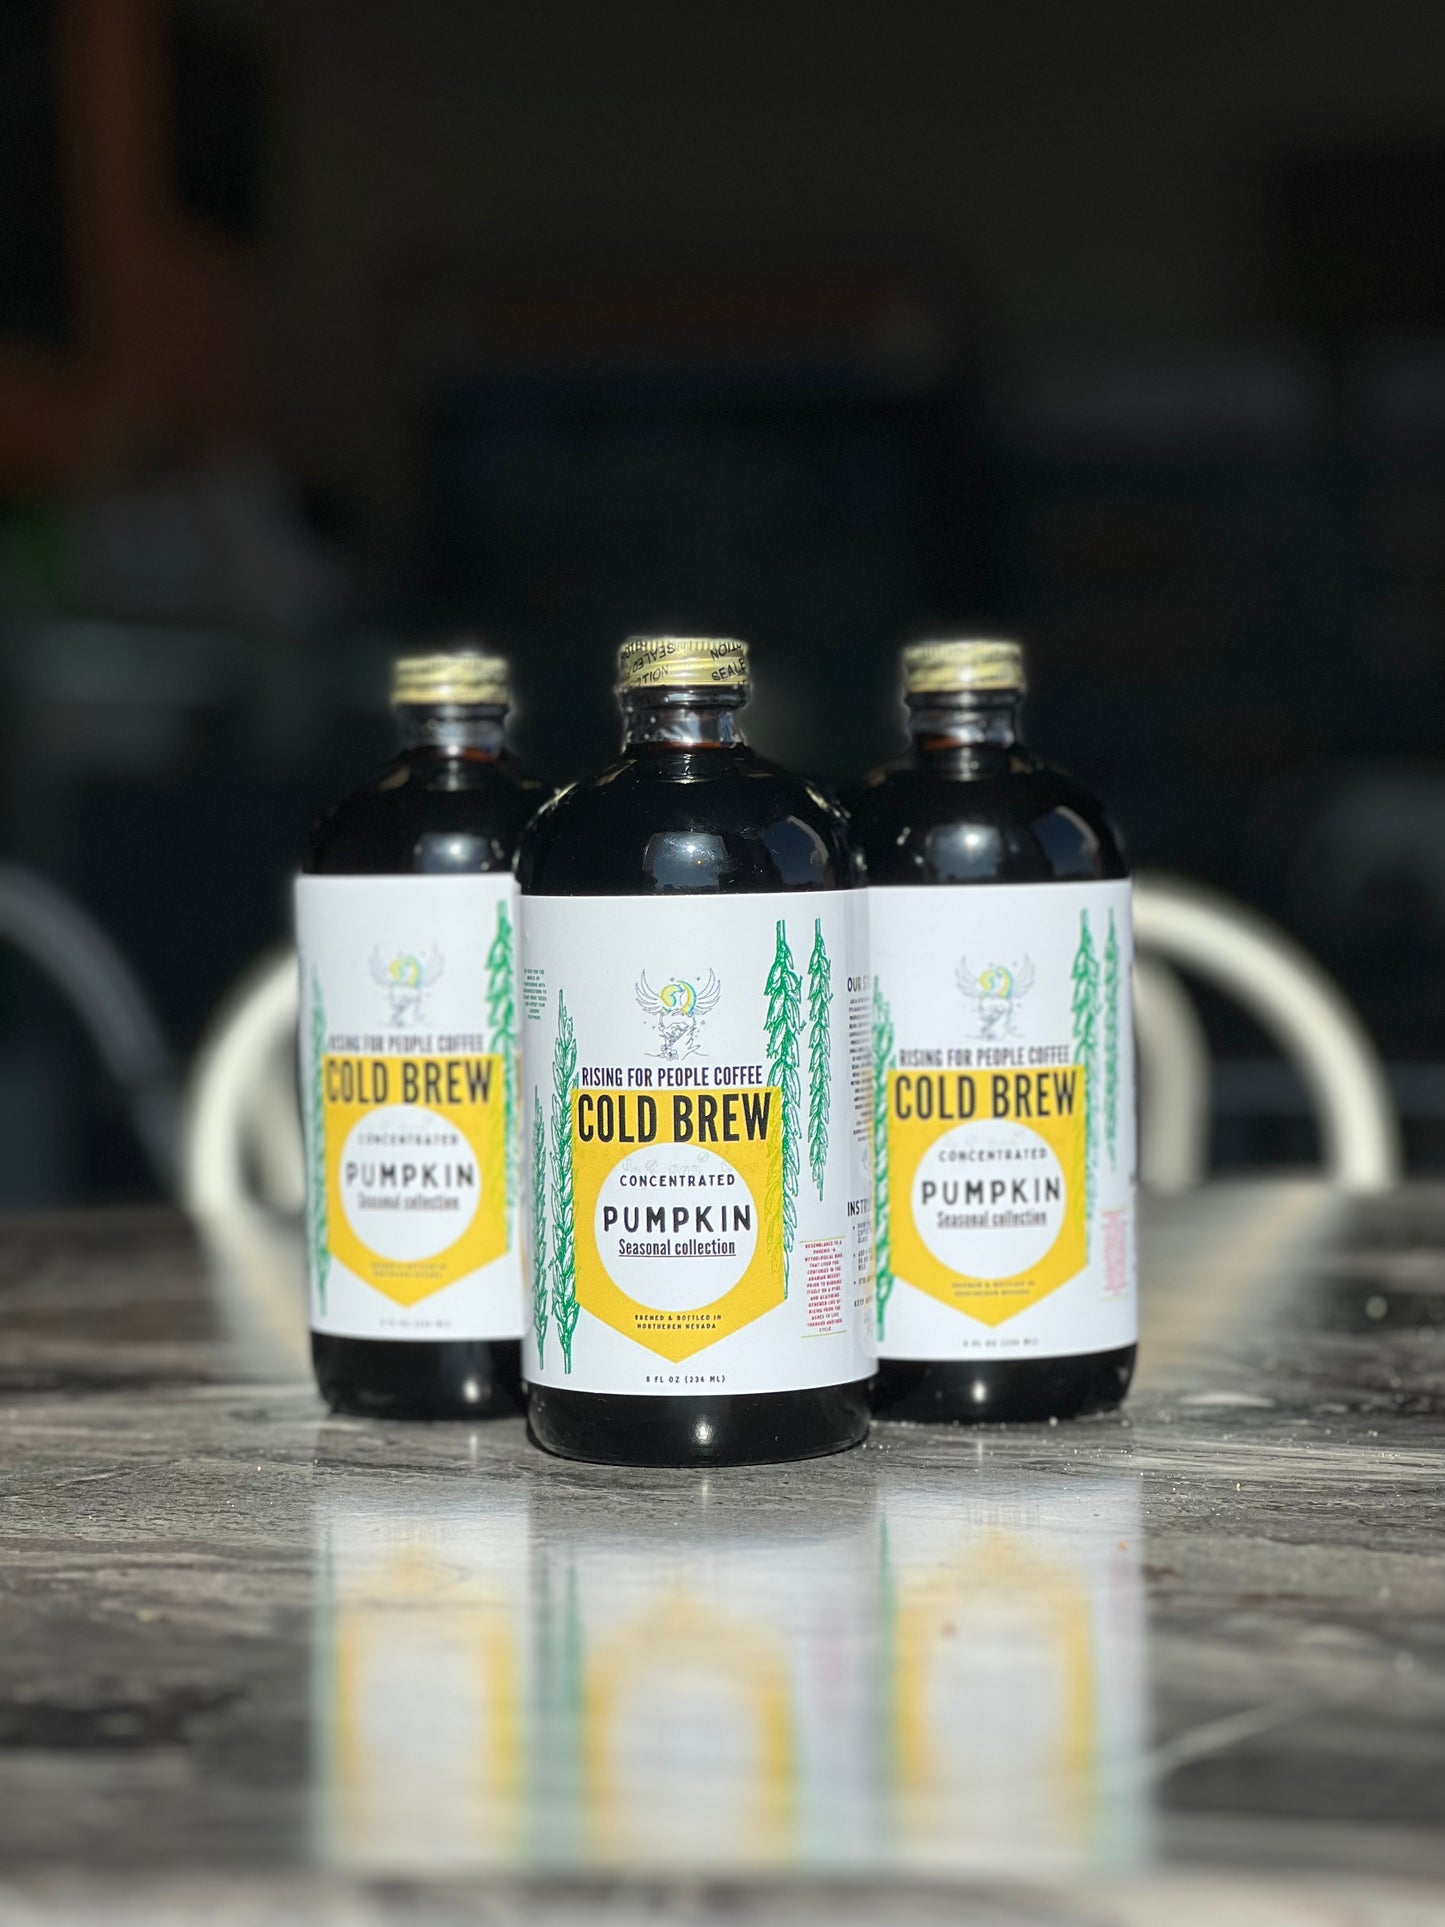 pumpkin cold brew by rising for people coffee